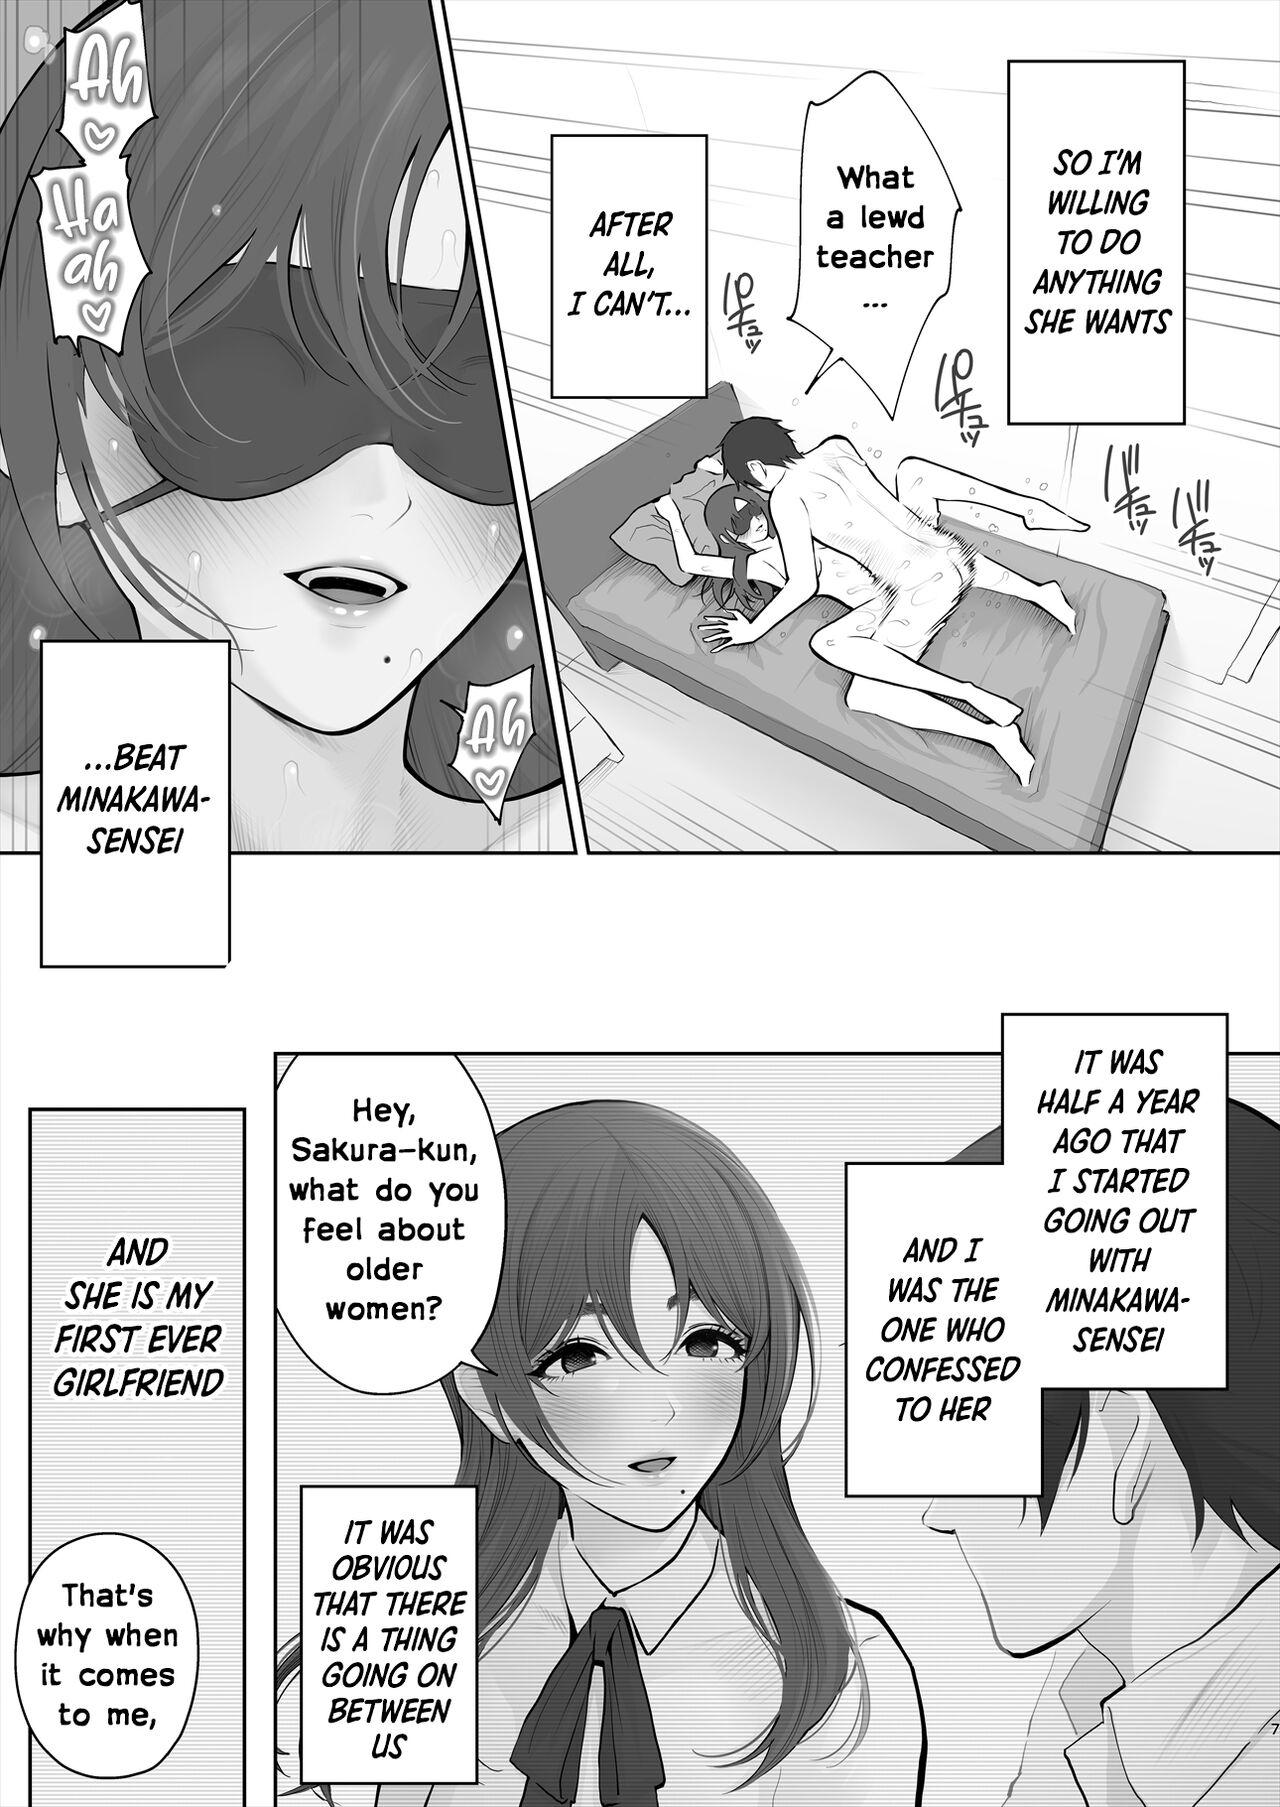 Camgirls Sensei wa Deau Mae Kara Choukyou Sumi | My Teacher Who, Prior to Our Encounter, Has Been Leashed In - Original Uncensored - Page 9